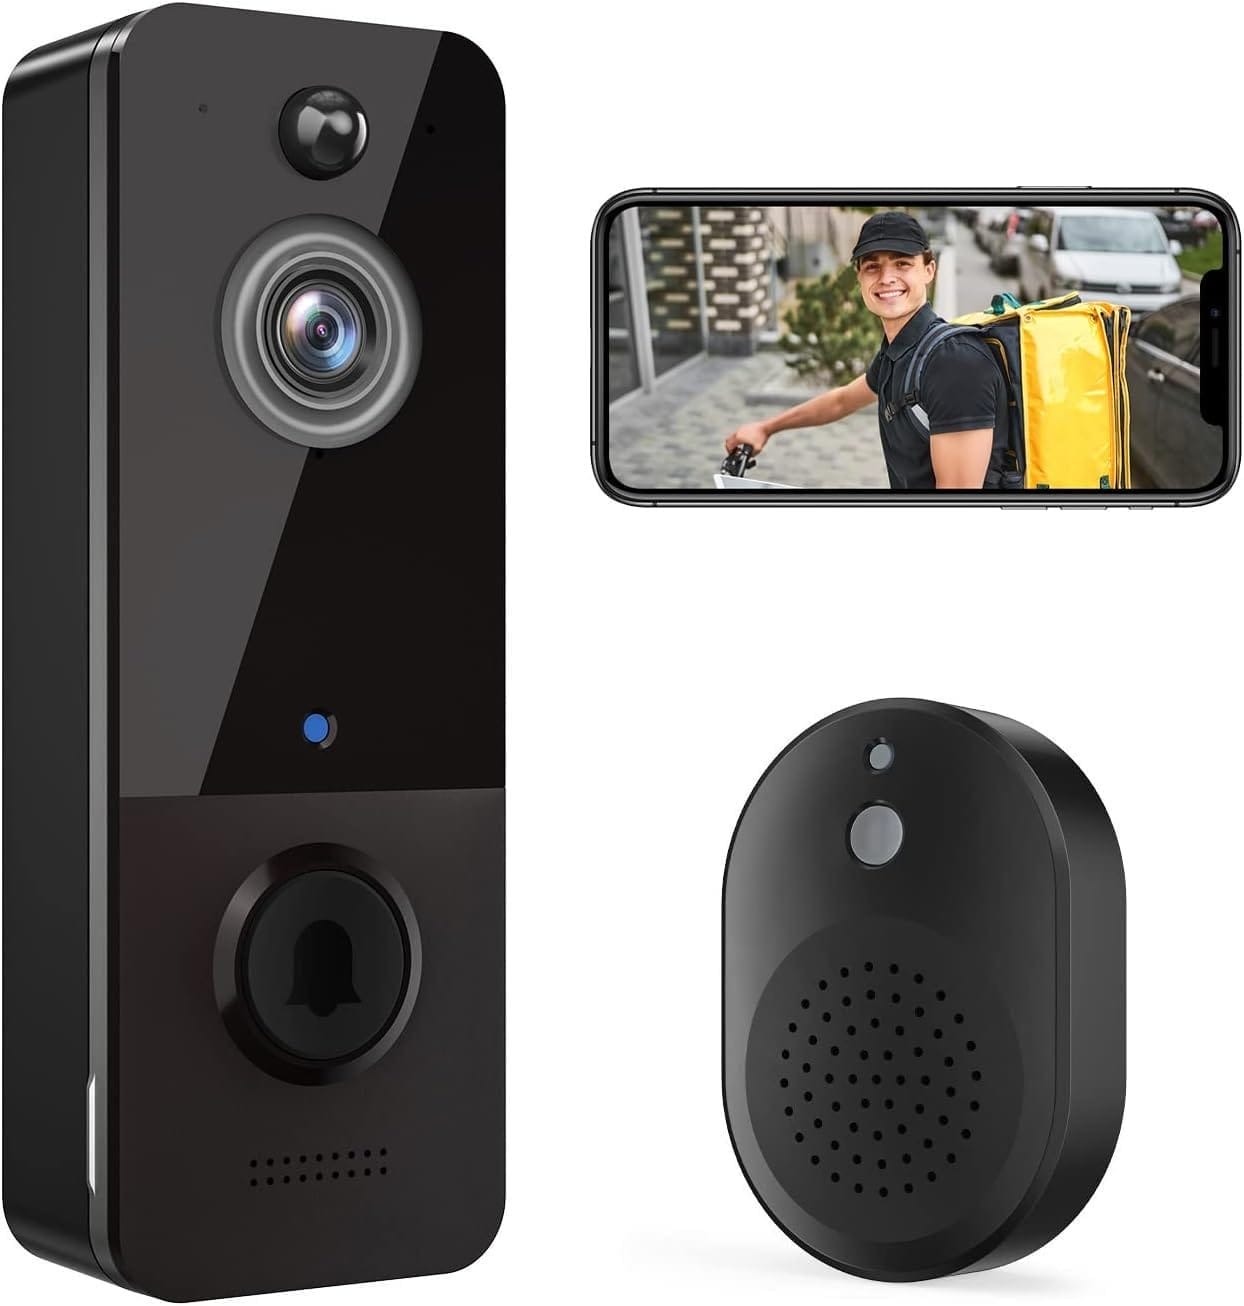 EKEN Smart Video Doorbell Camera Wireless with Chime Ringer, Smart AI Human Detection, 2.4G WiFi, 2-Way Audio, HD Live Image, Night Vision, Cloud Storage, Battery Powered, Indoor/Outdoor Surveillance